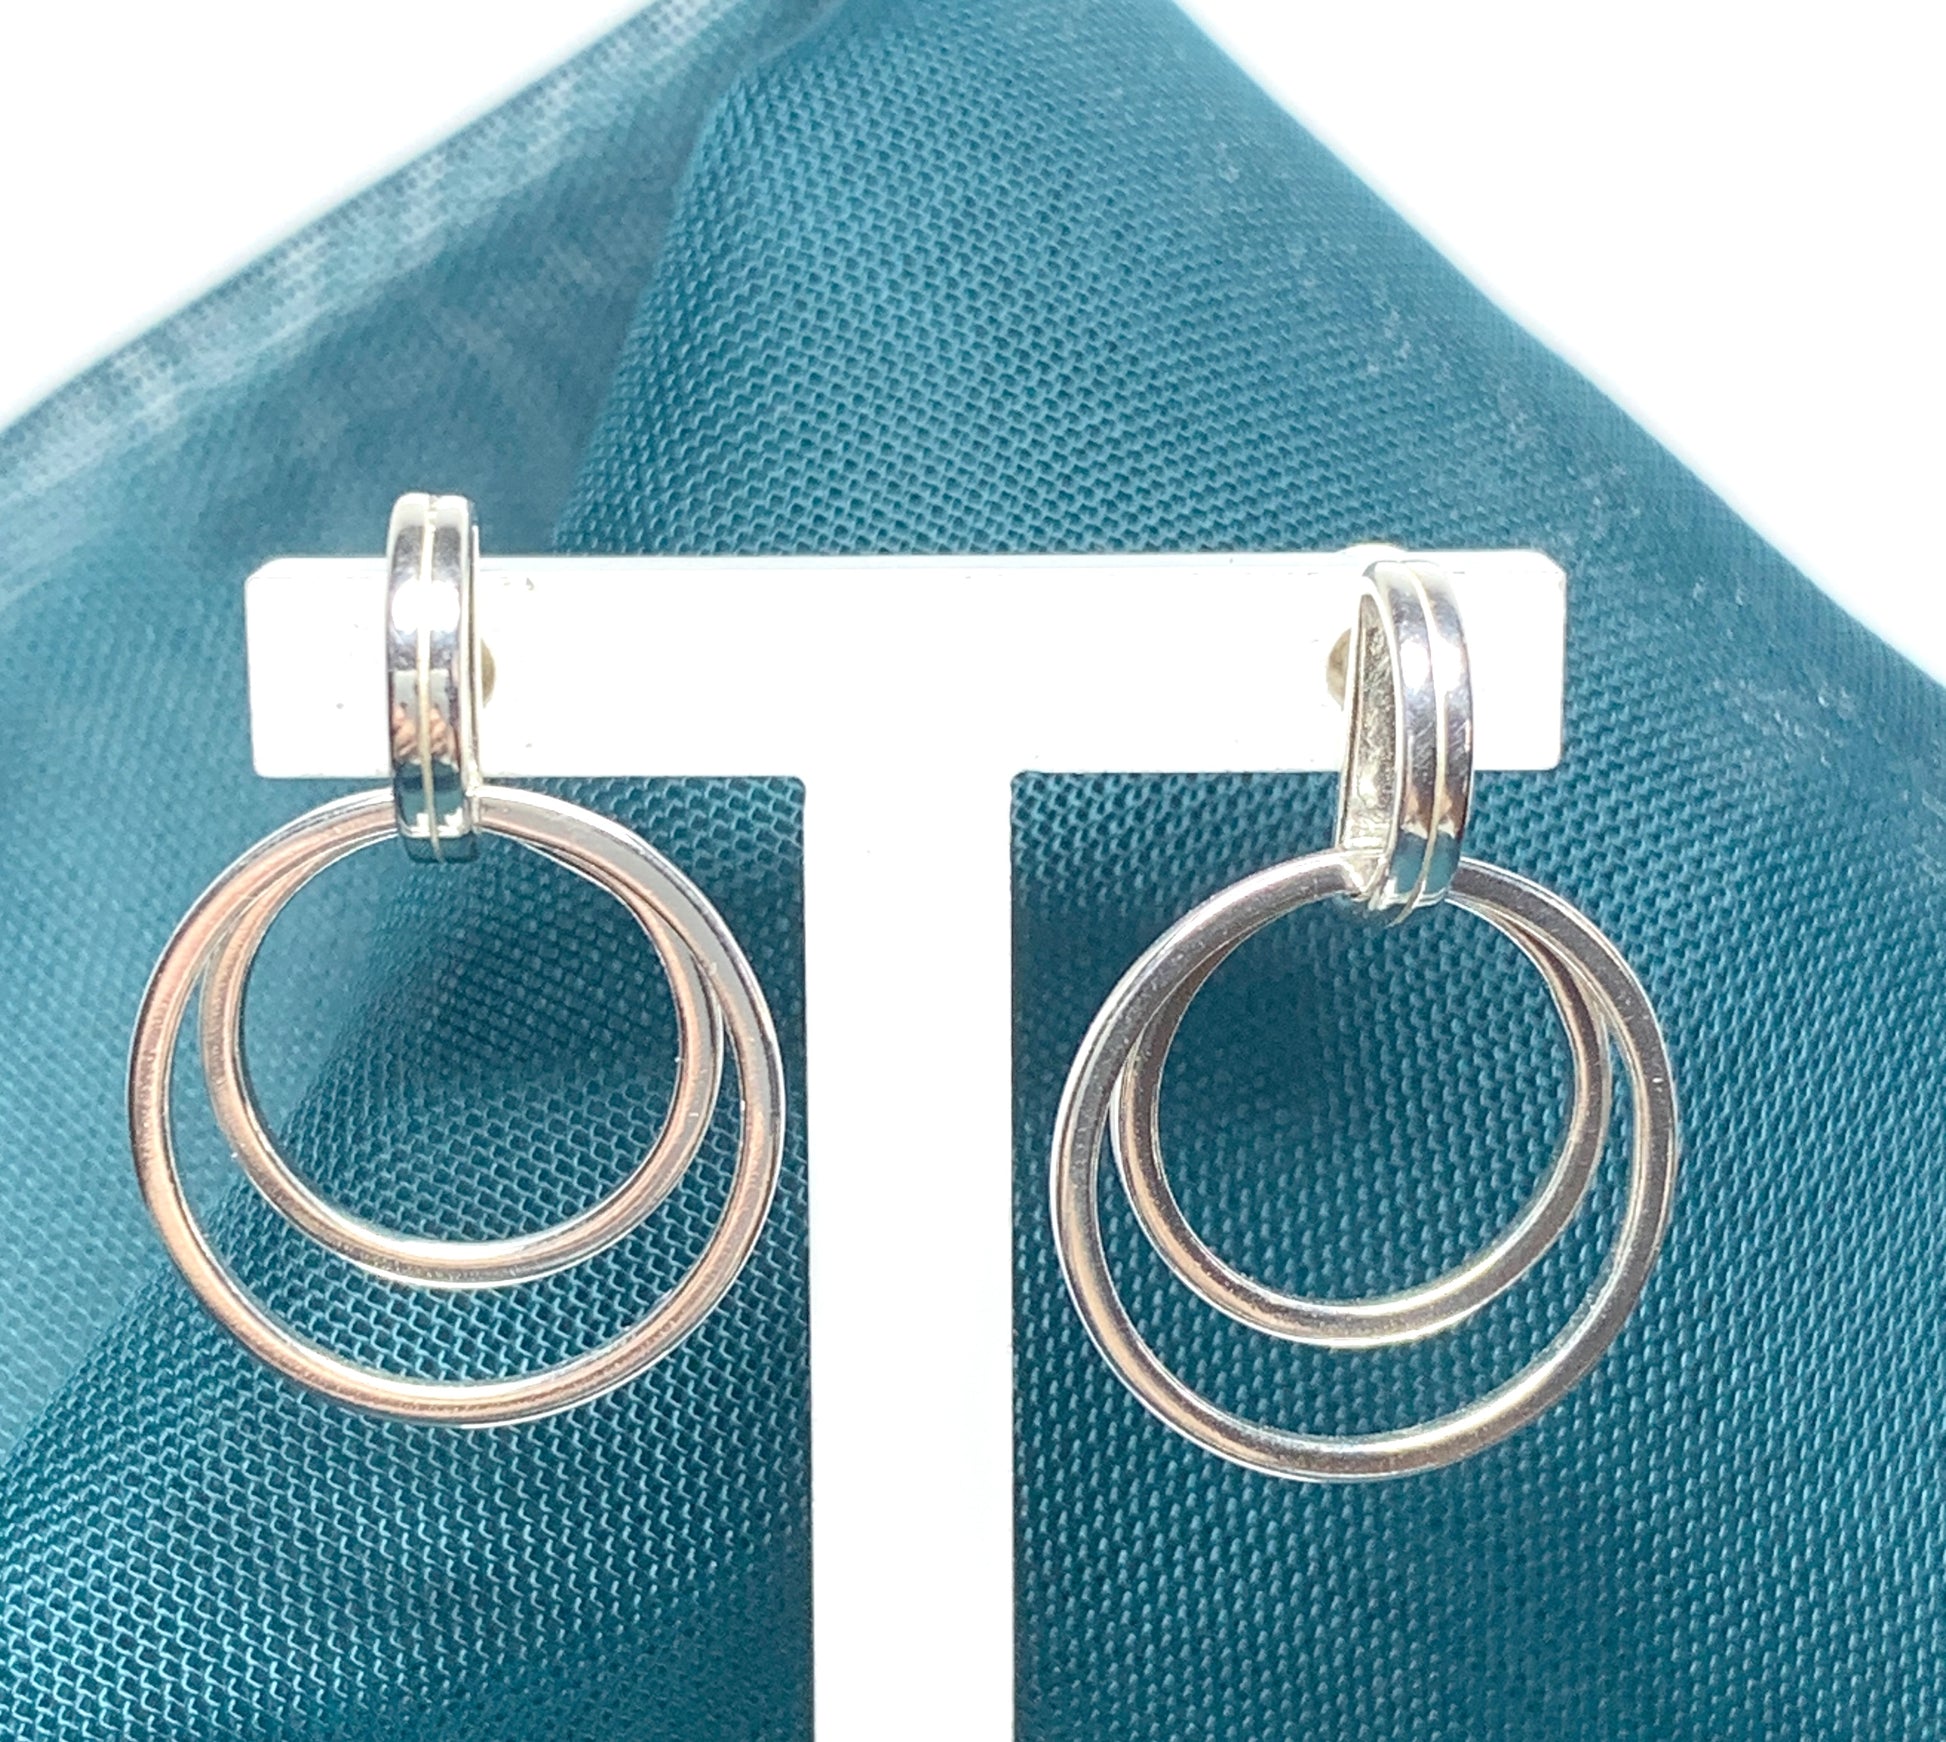 Double round shaped sterling silver drop earrings